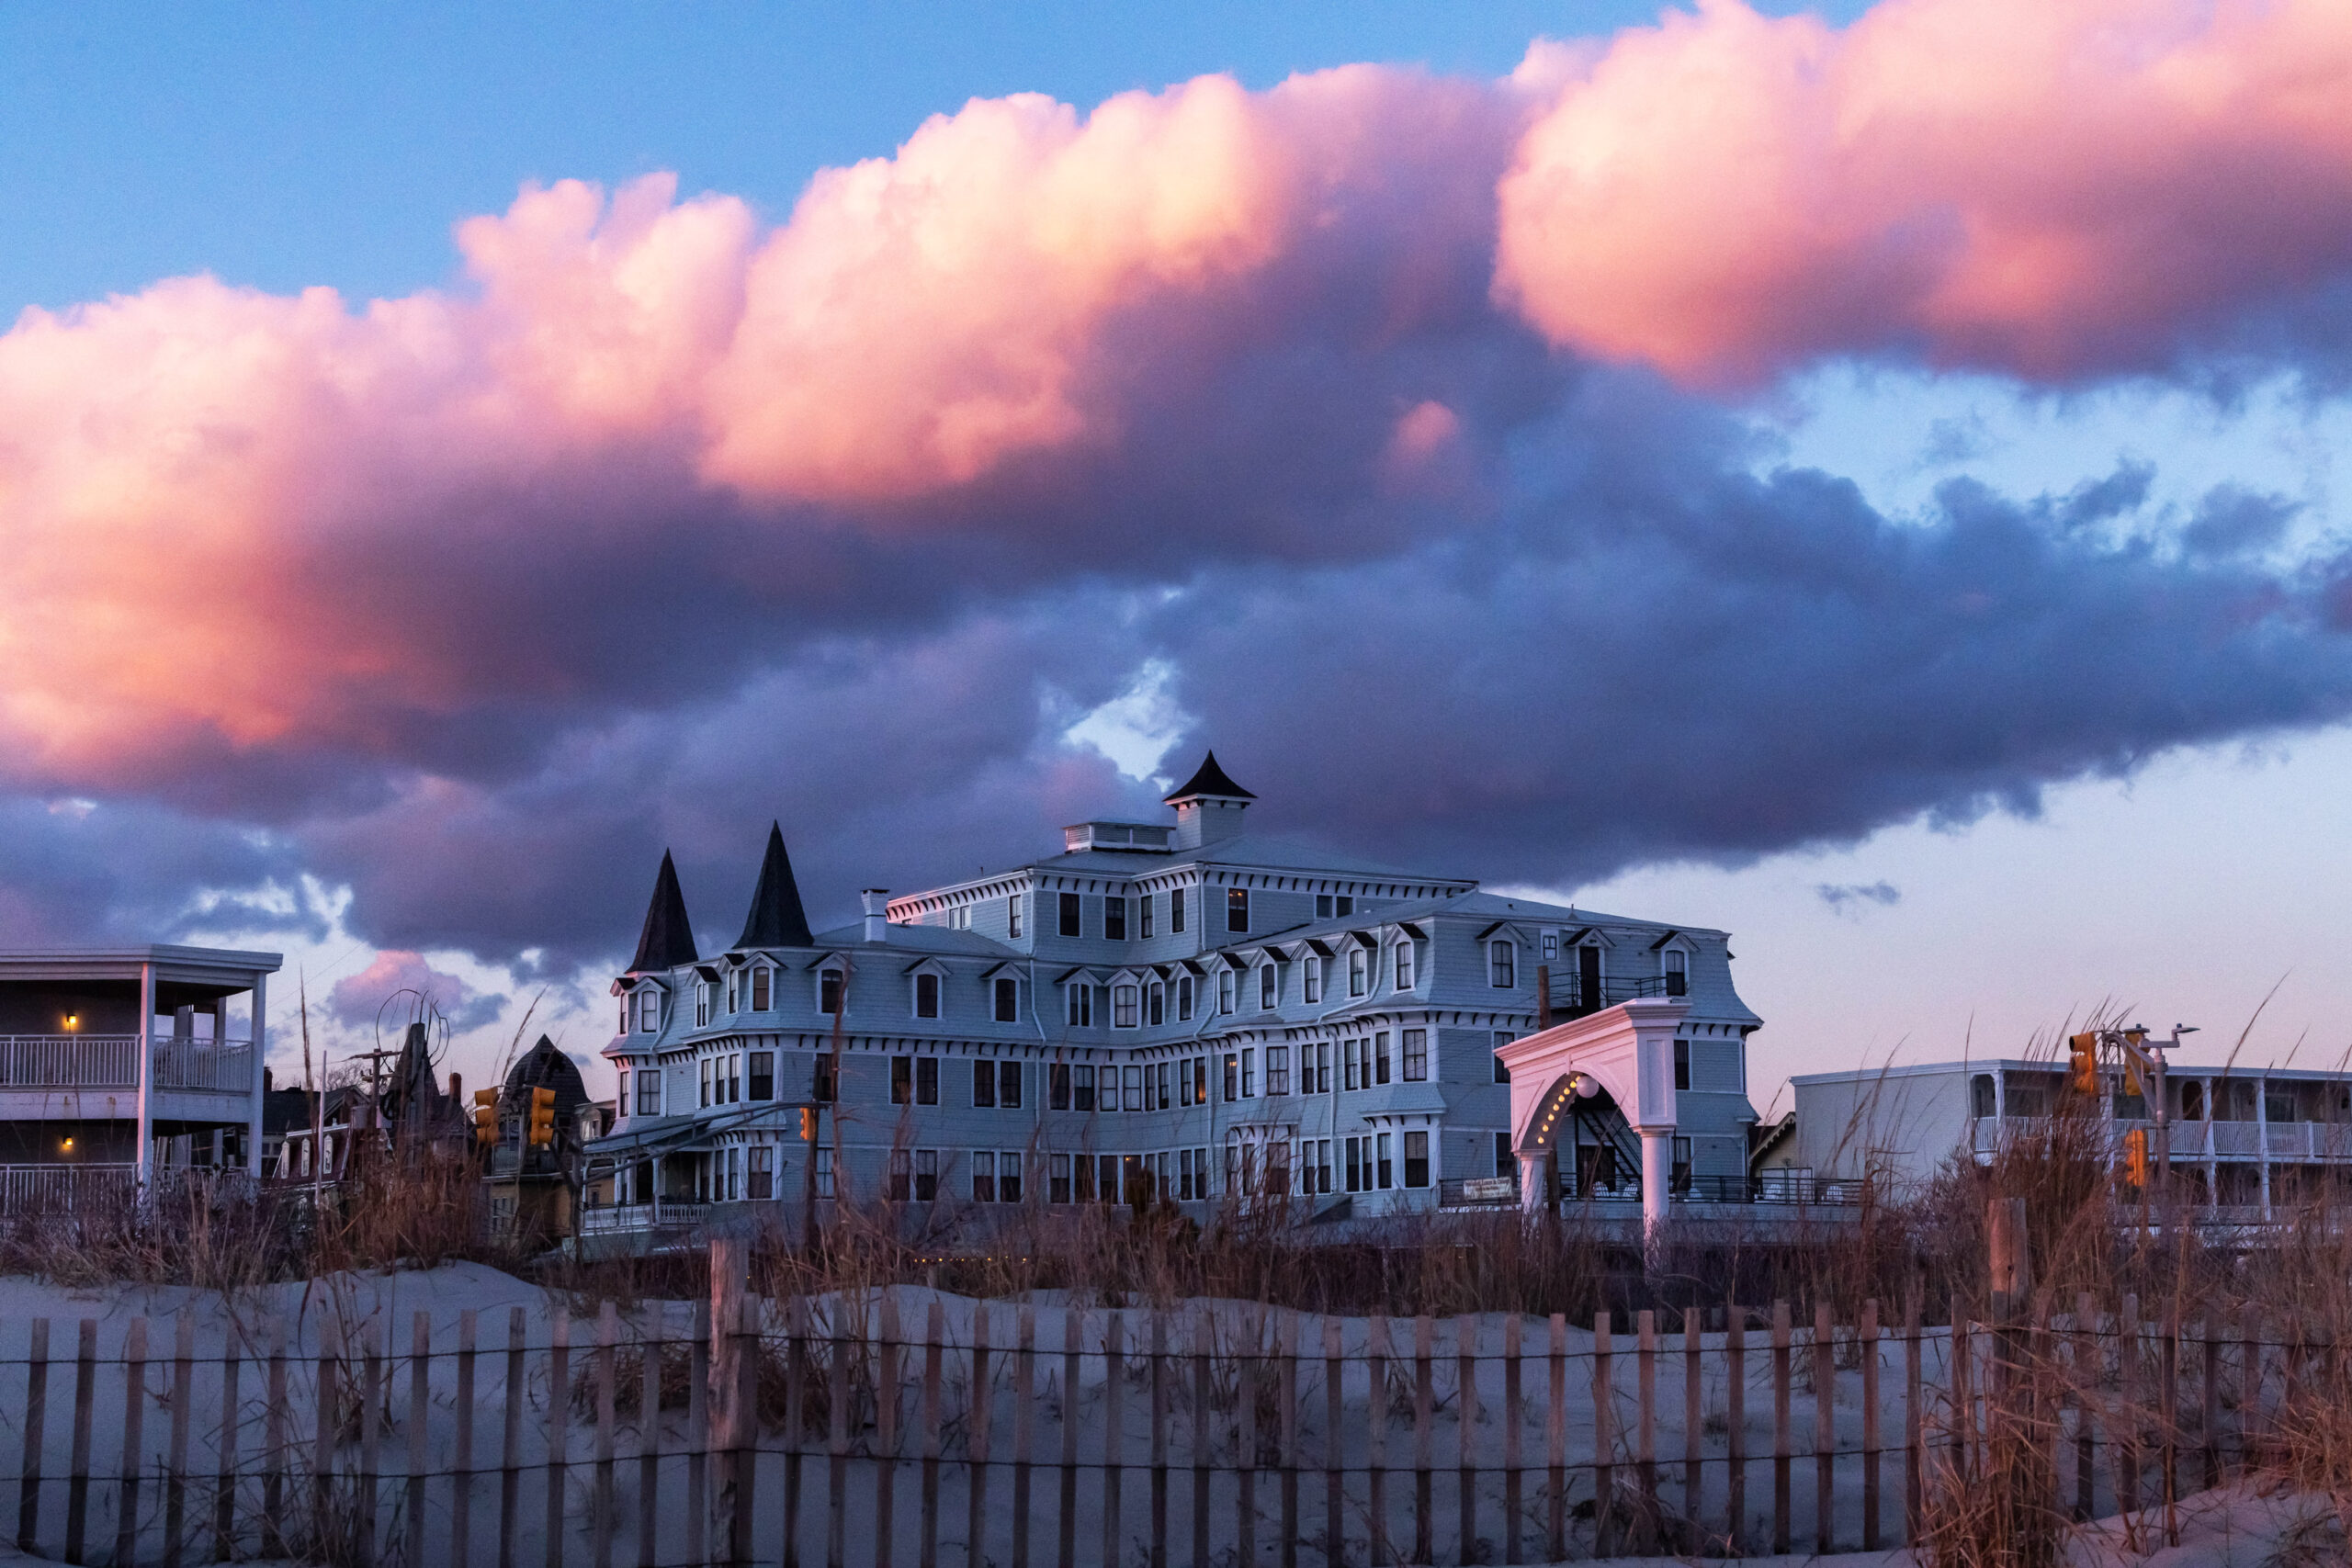 A view of the Inn of Cape May from the beach with a big puffy pink and purple cloud in the sky.